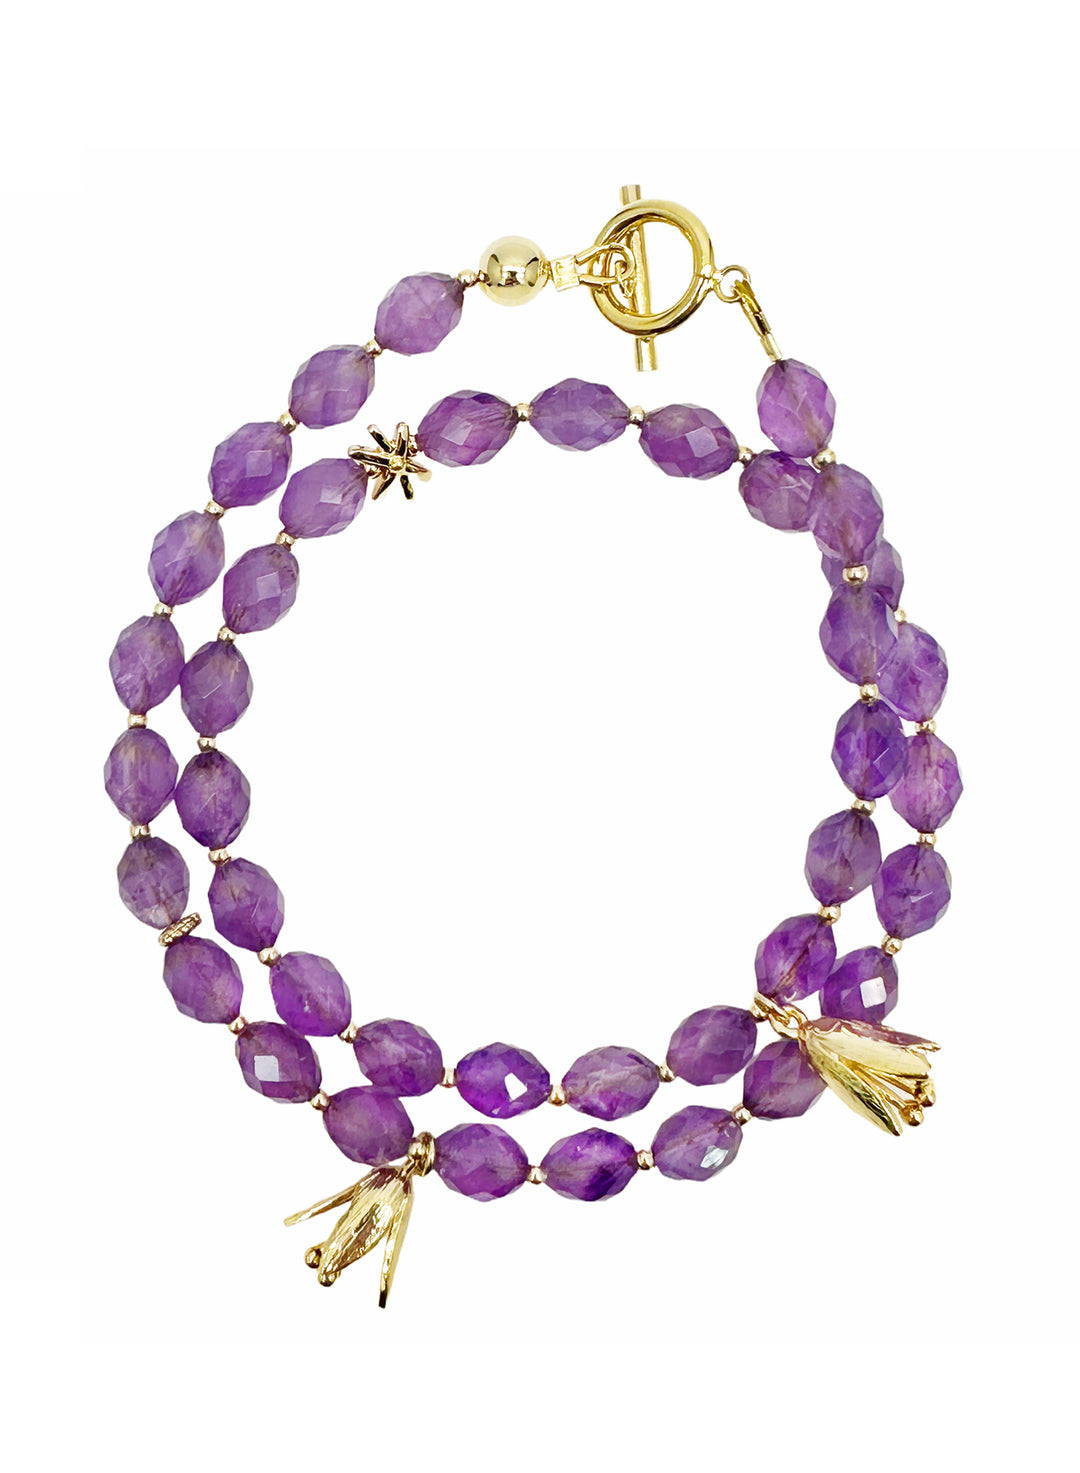 Amethyst with Flower Charms Double Layers Bracelet/ Choker LB005 - FARRA